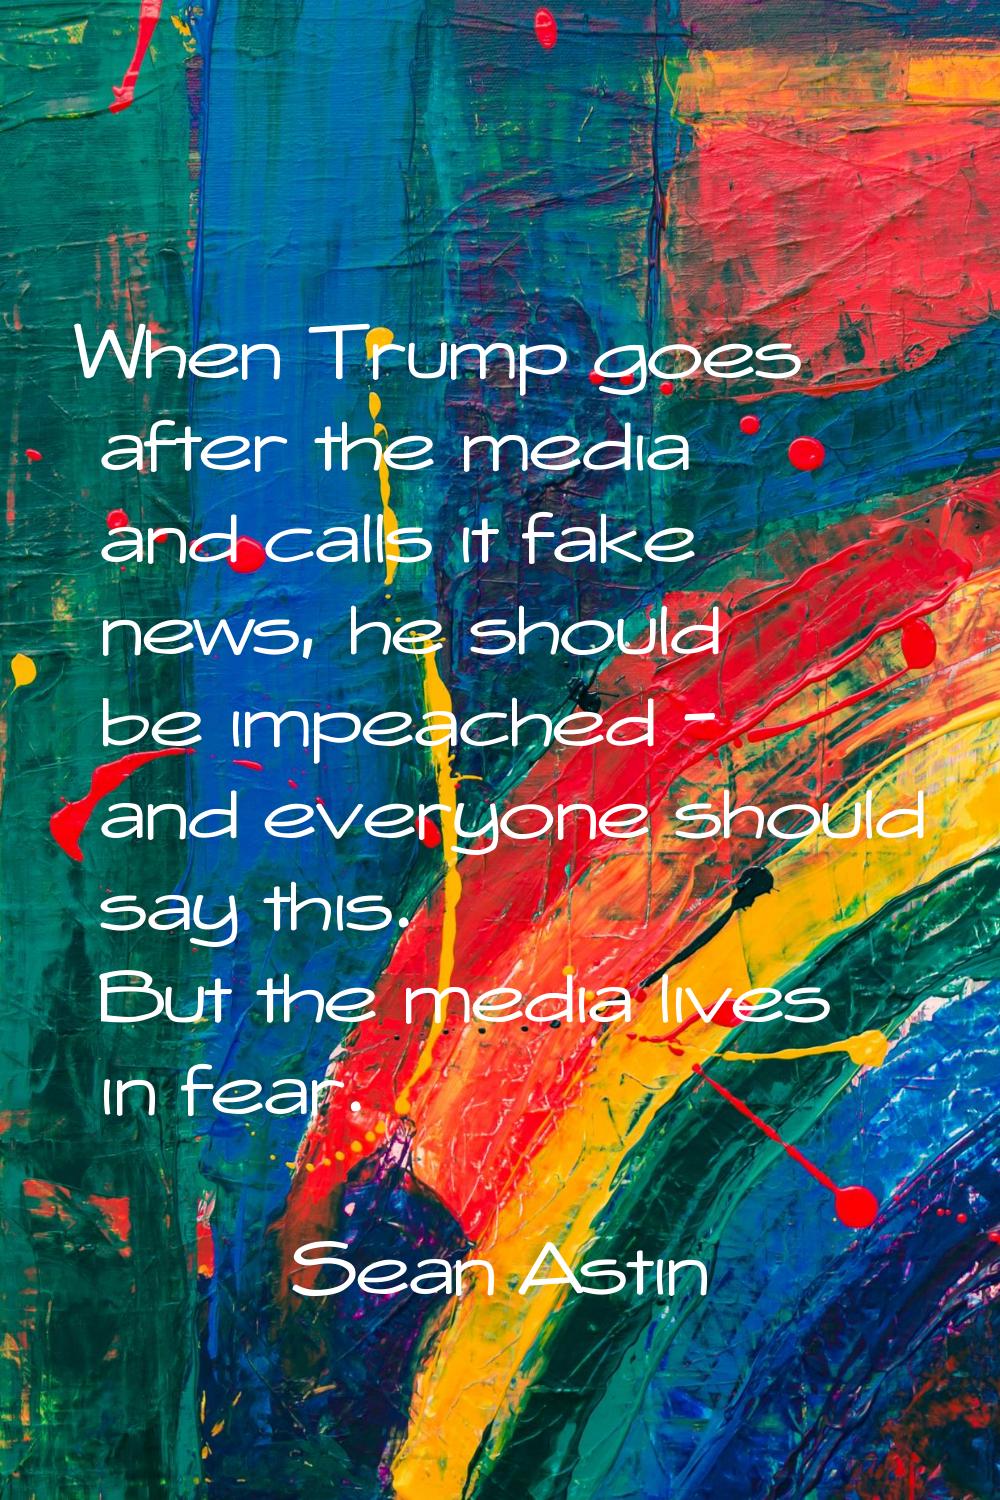 When Trump goes after the media and calls it fake news, he should be impeached - and everyone shoul